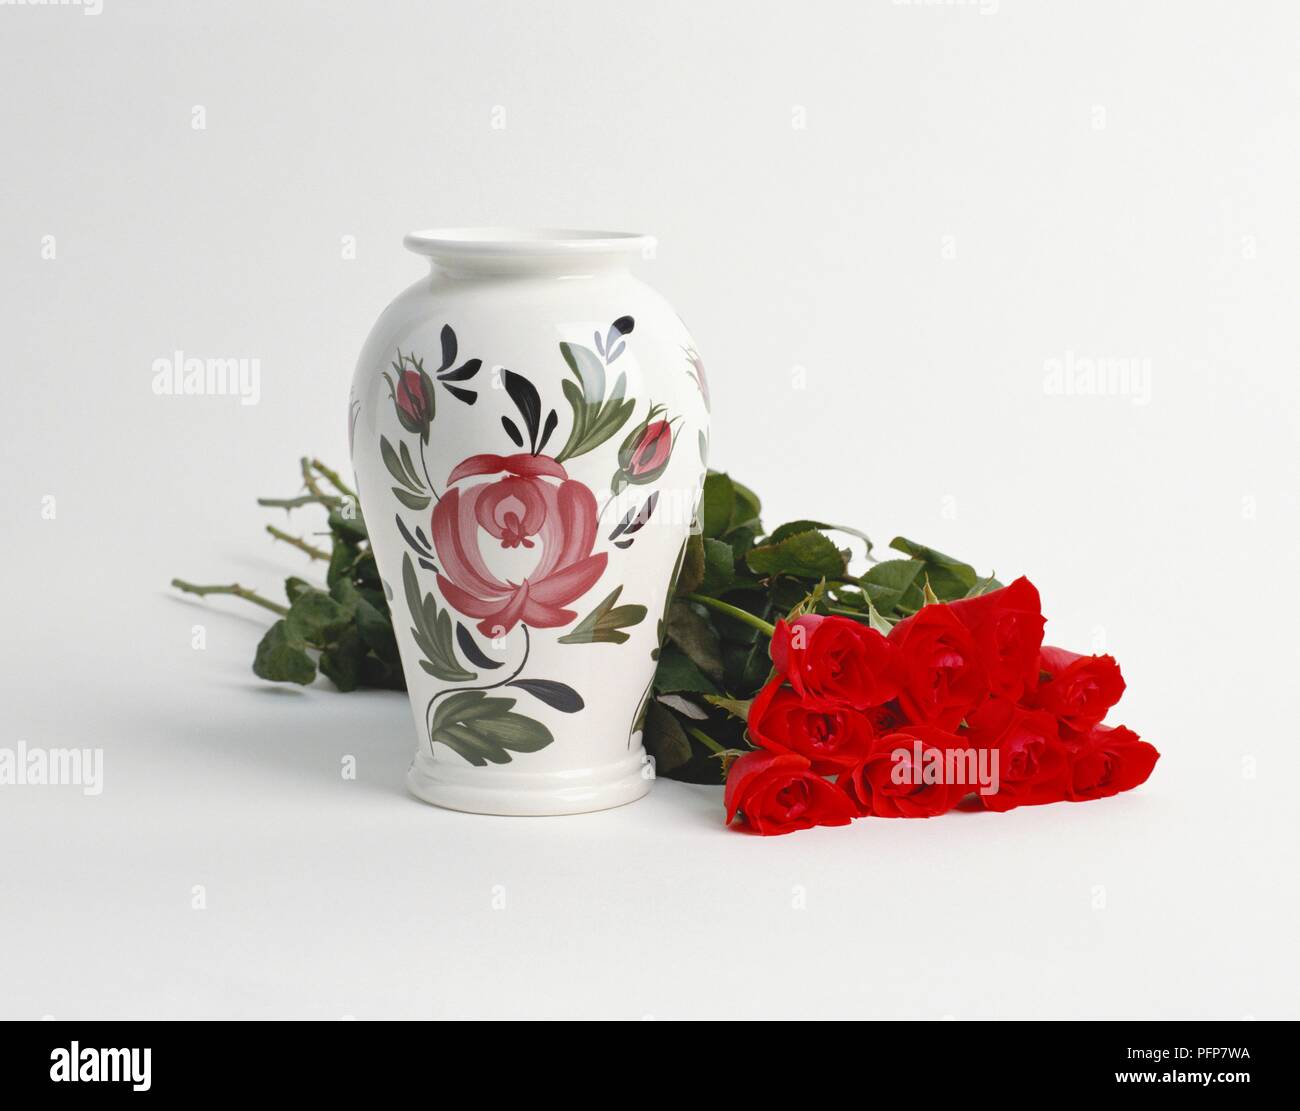 Bunch of red roses next to vase decorated with floral pattern Stock Photo